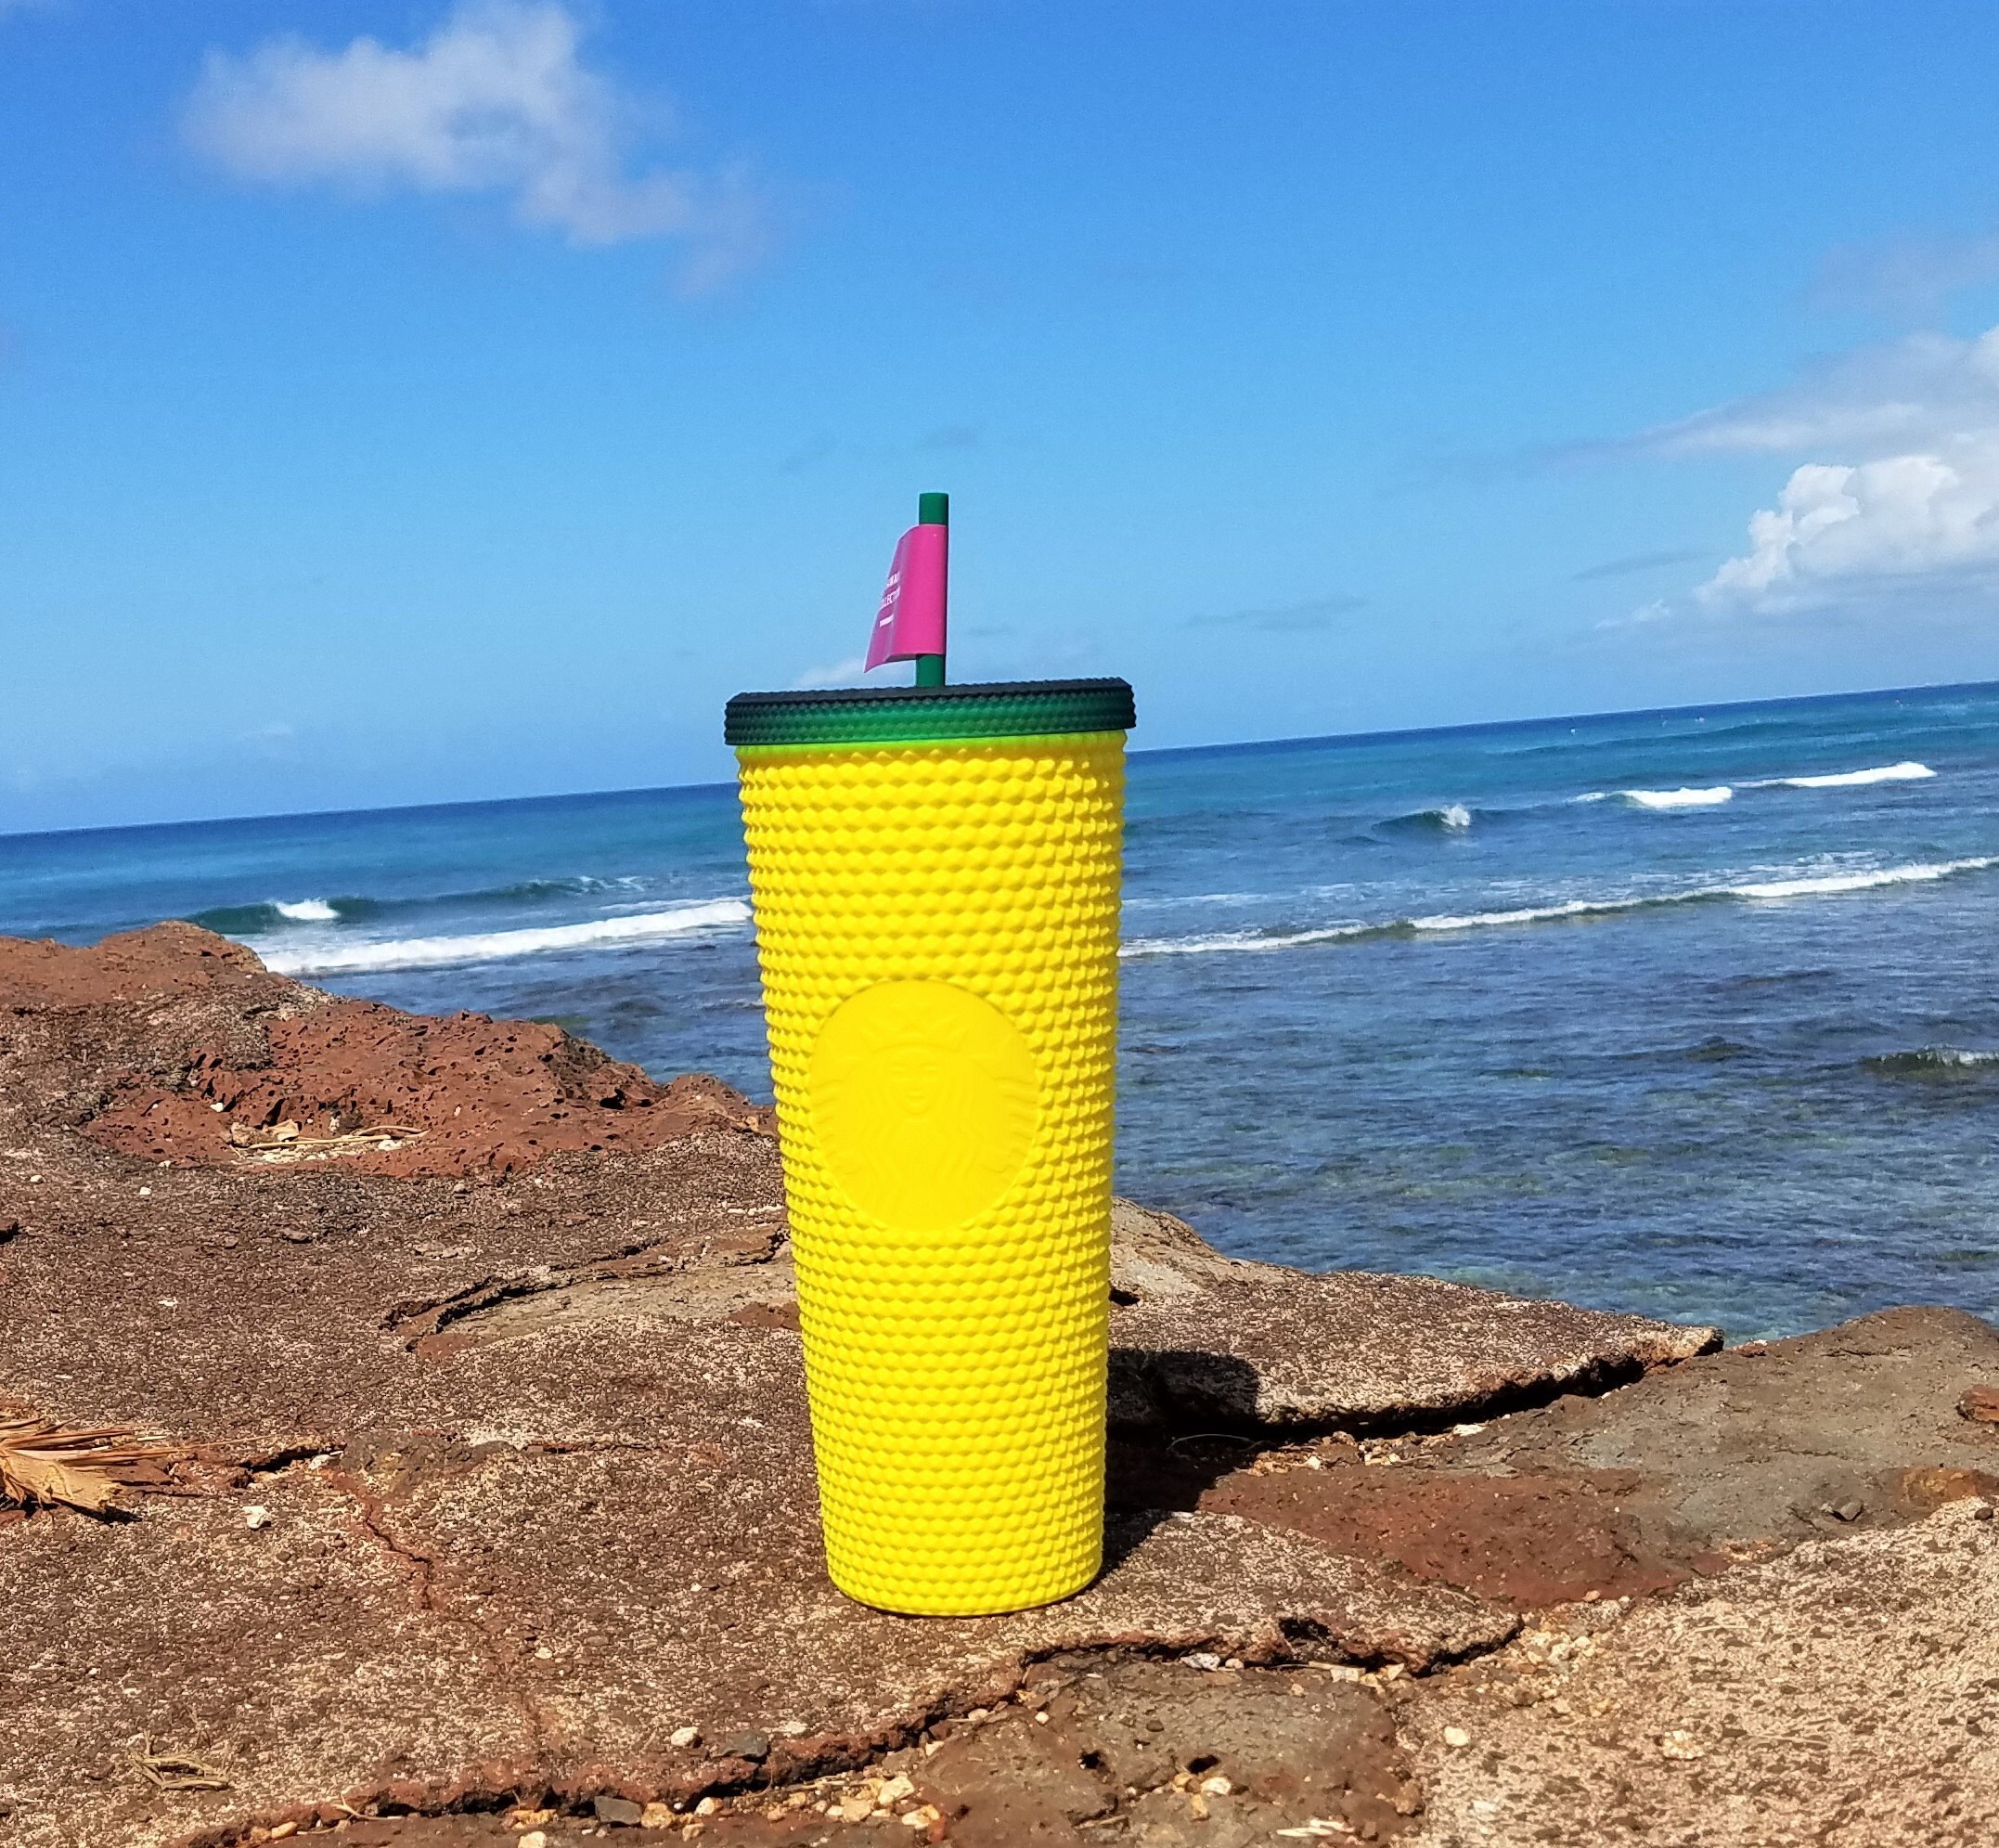 You Can Get A Starbucks Tumbler Shaped Like A Pineapple In Hawaii